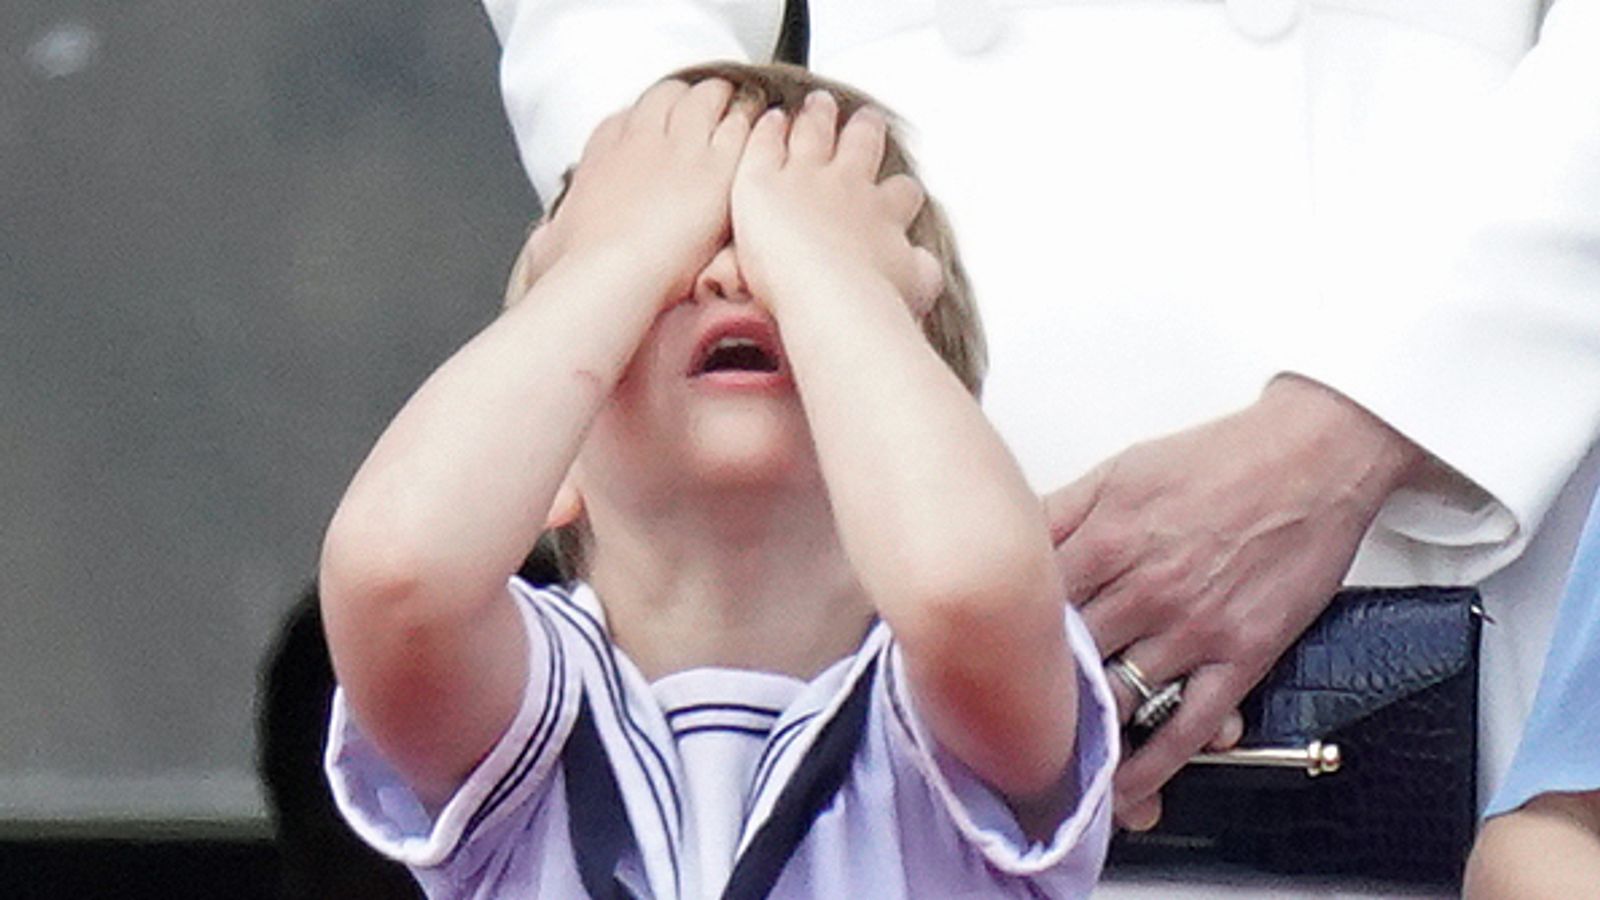 Prince Louis on Buckingham Palace balcony - little royal steals show